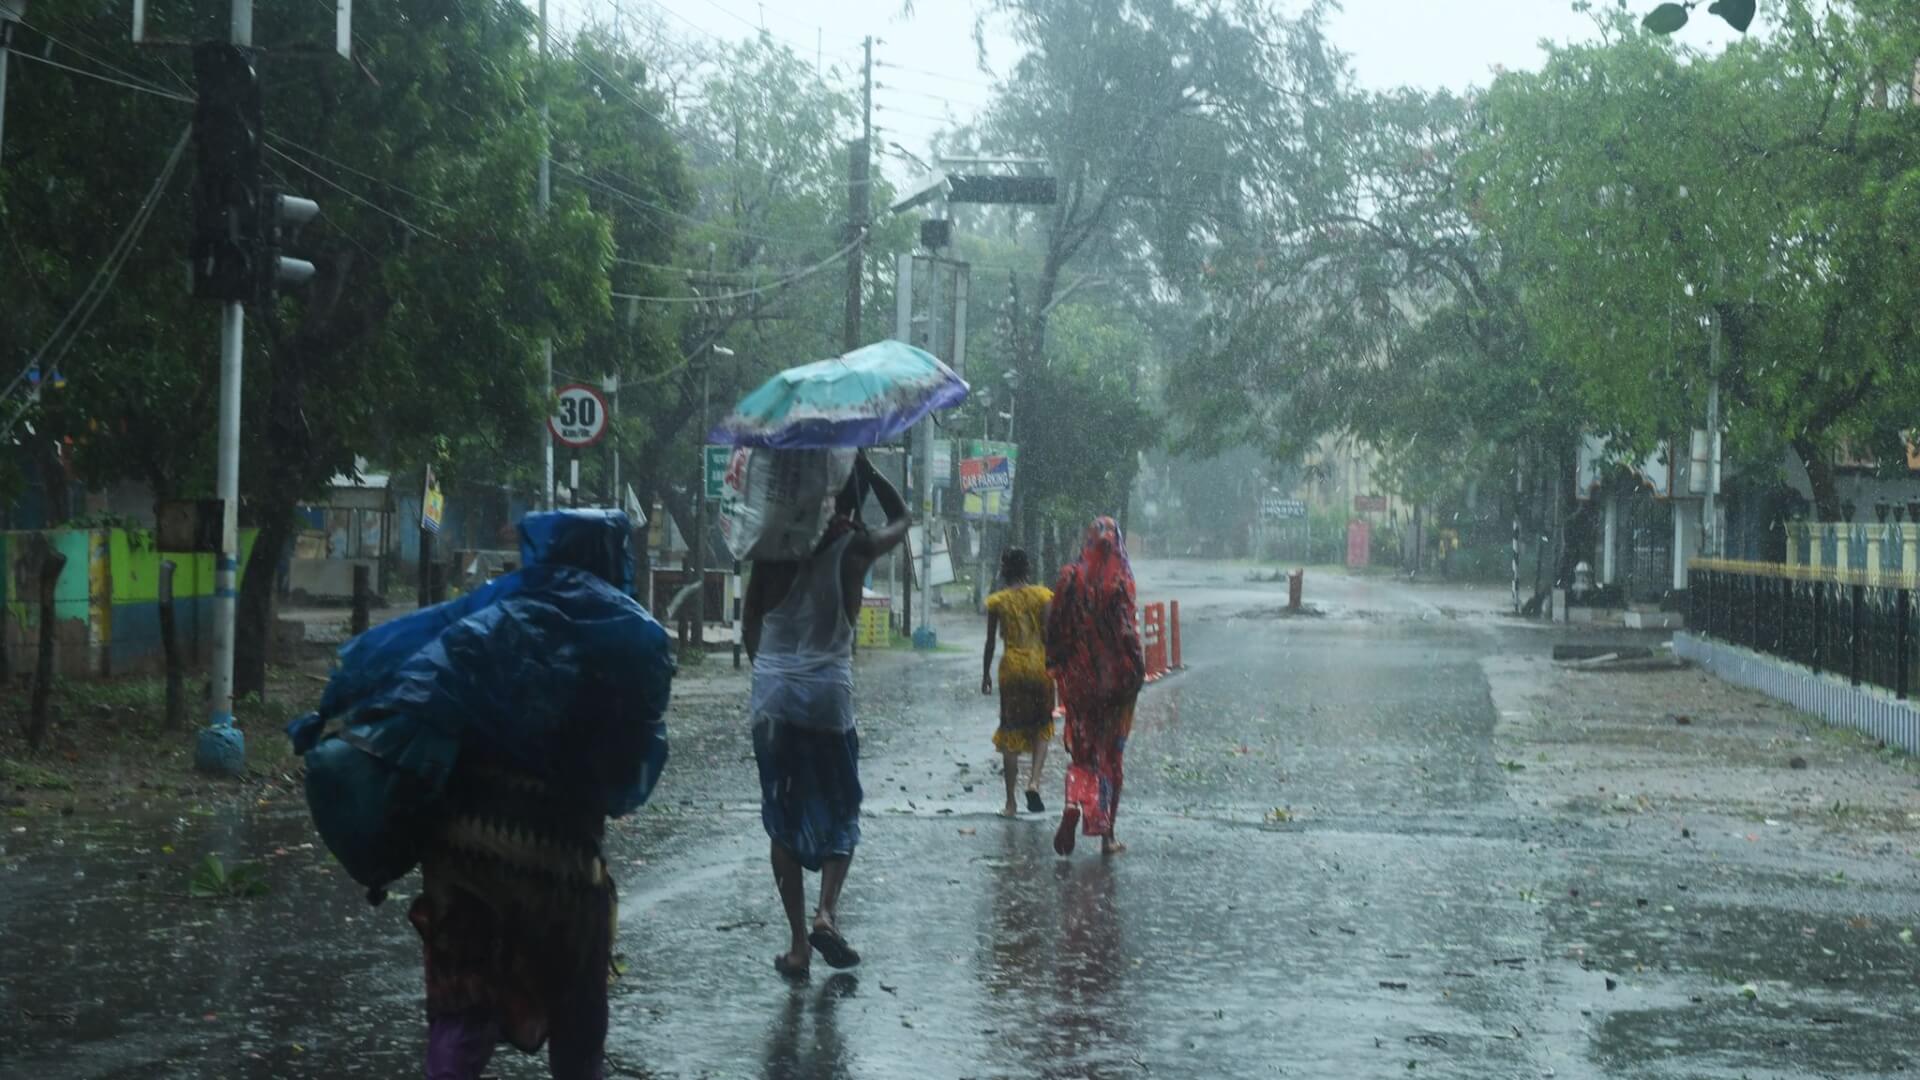 Cyclone Amphan Causes Devastation Across West Bengal and Bangladesh, 20 Deaths Reported